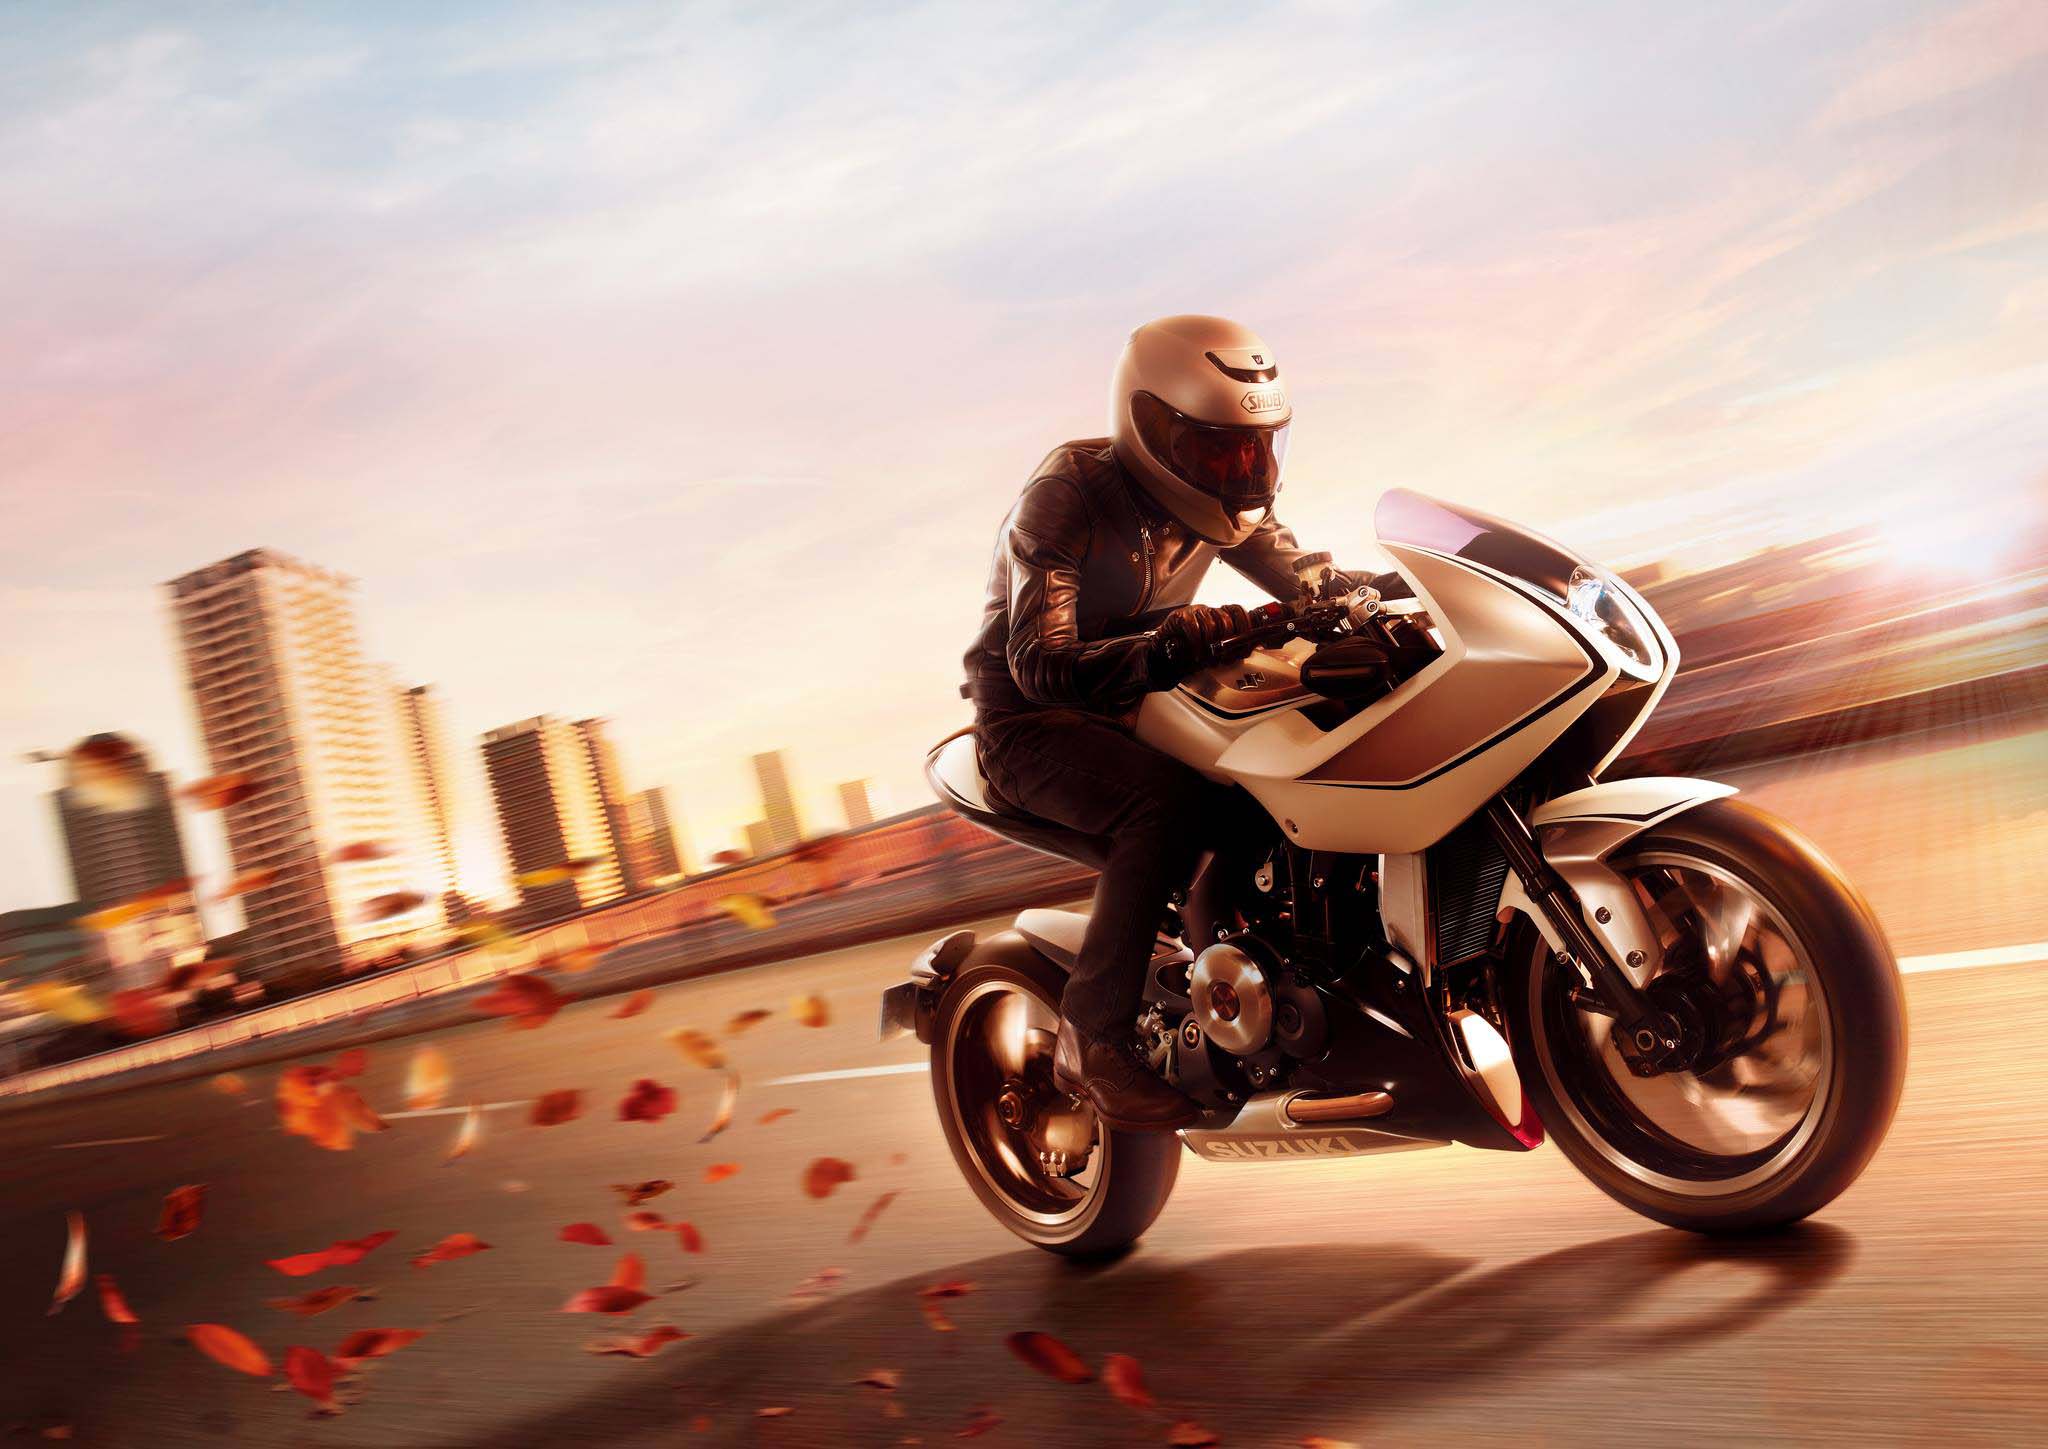 Suzuki Recursion Image - Moving Pictures Of Motorcycles - HD Wallpaper 